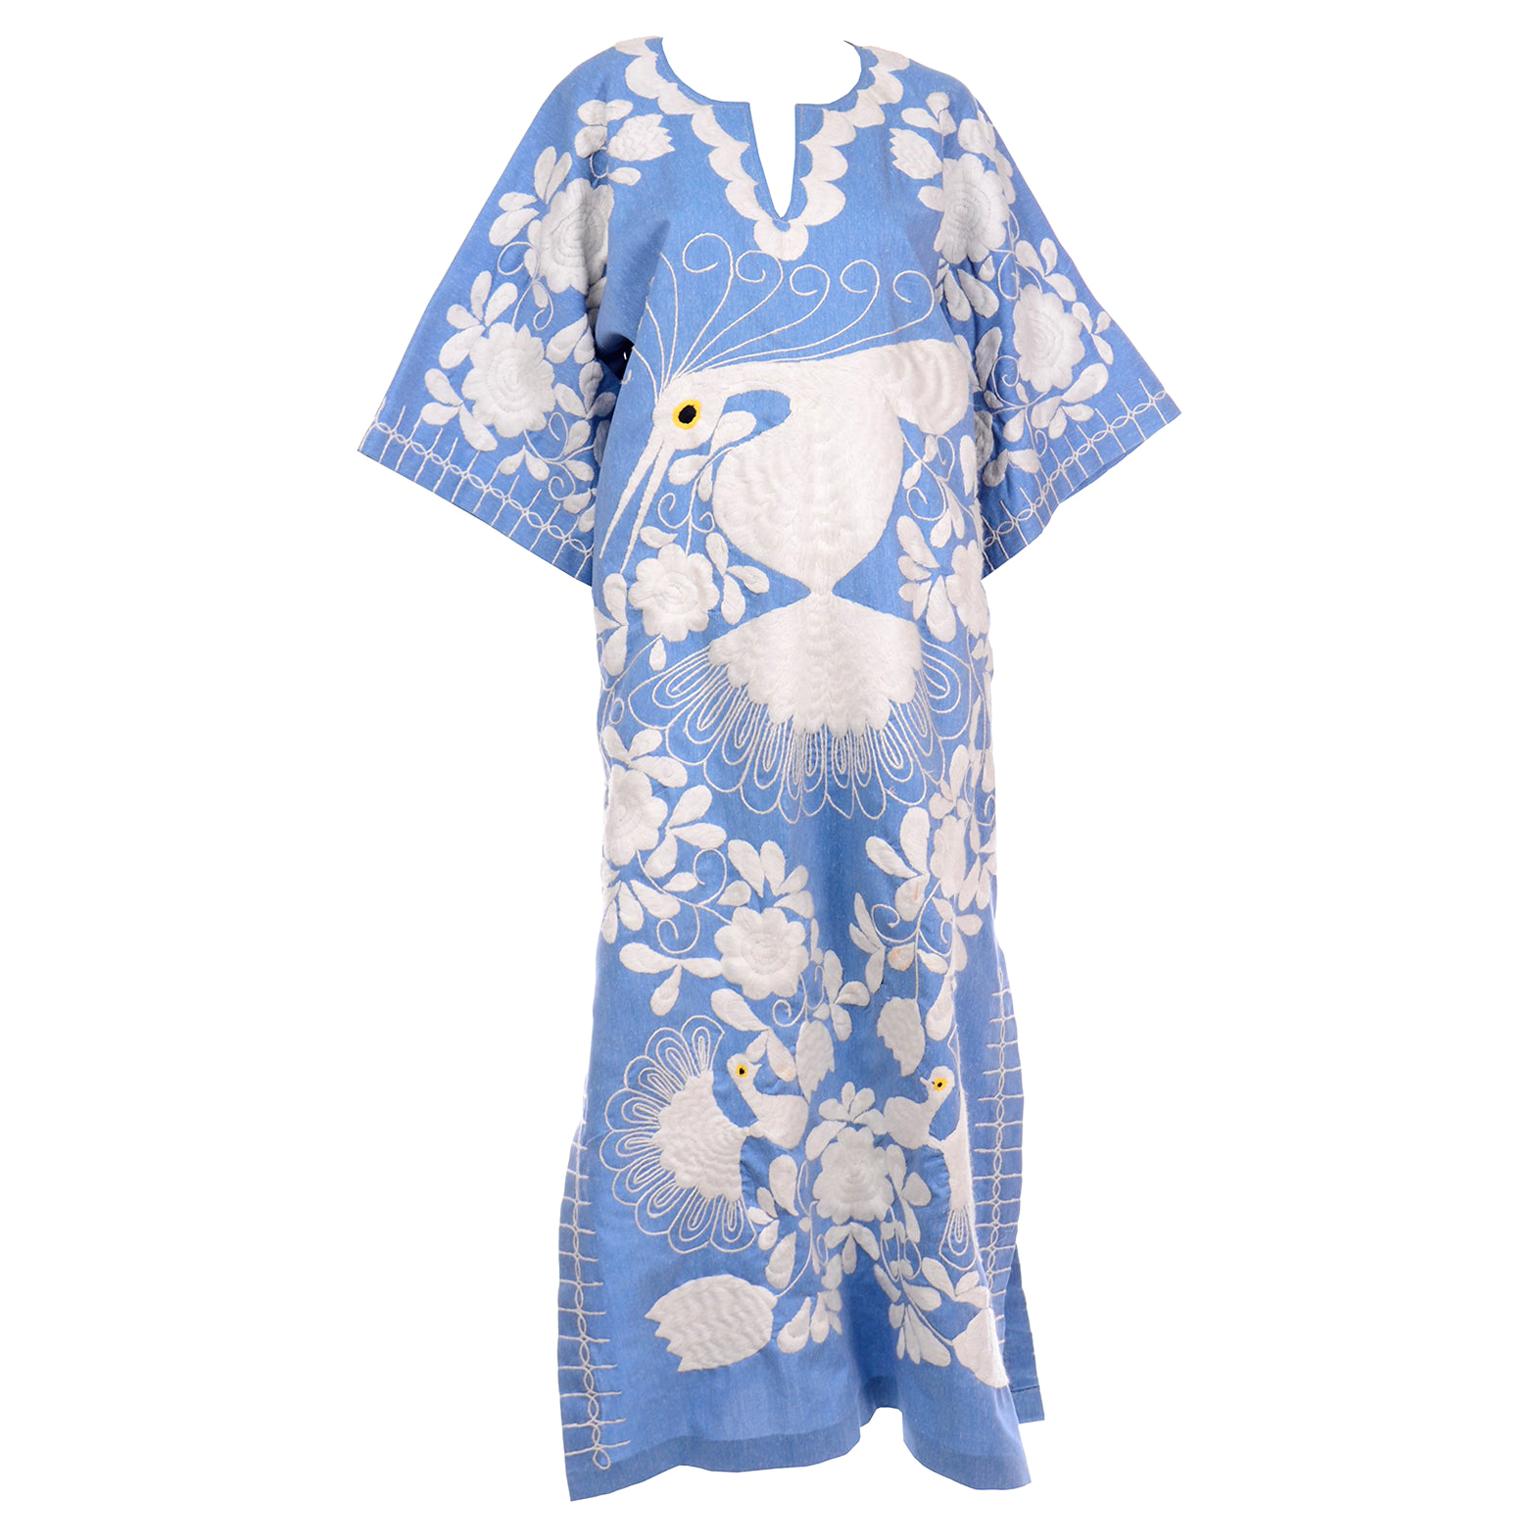 Vintage Embroidered Blue and White Caftan Dress With Floral Bird Motif